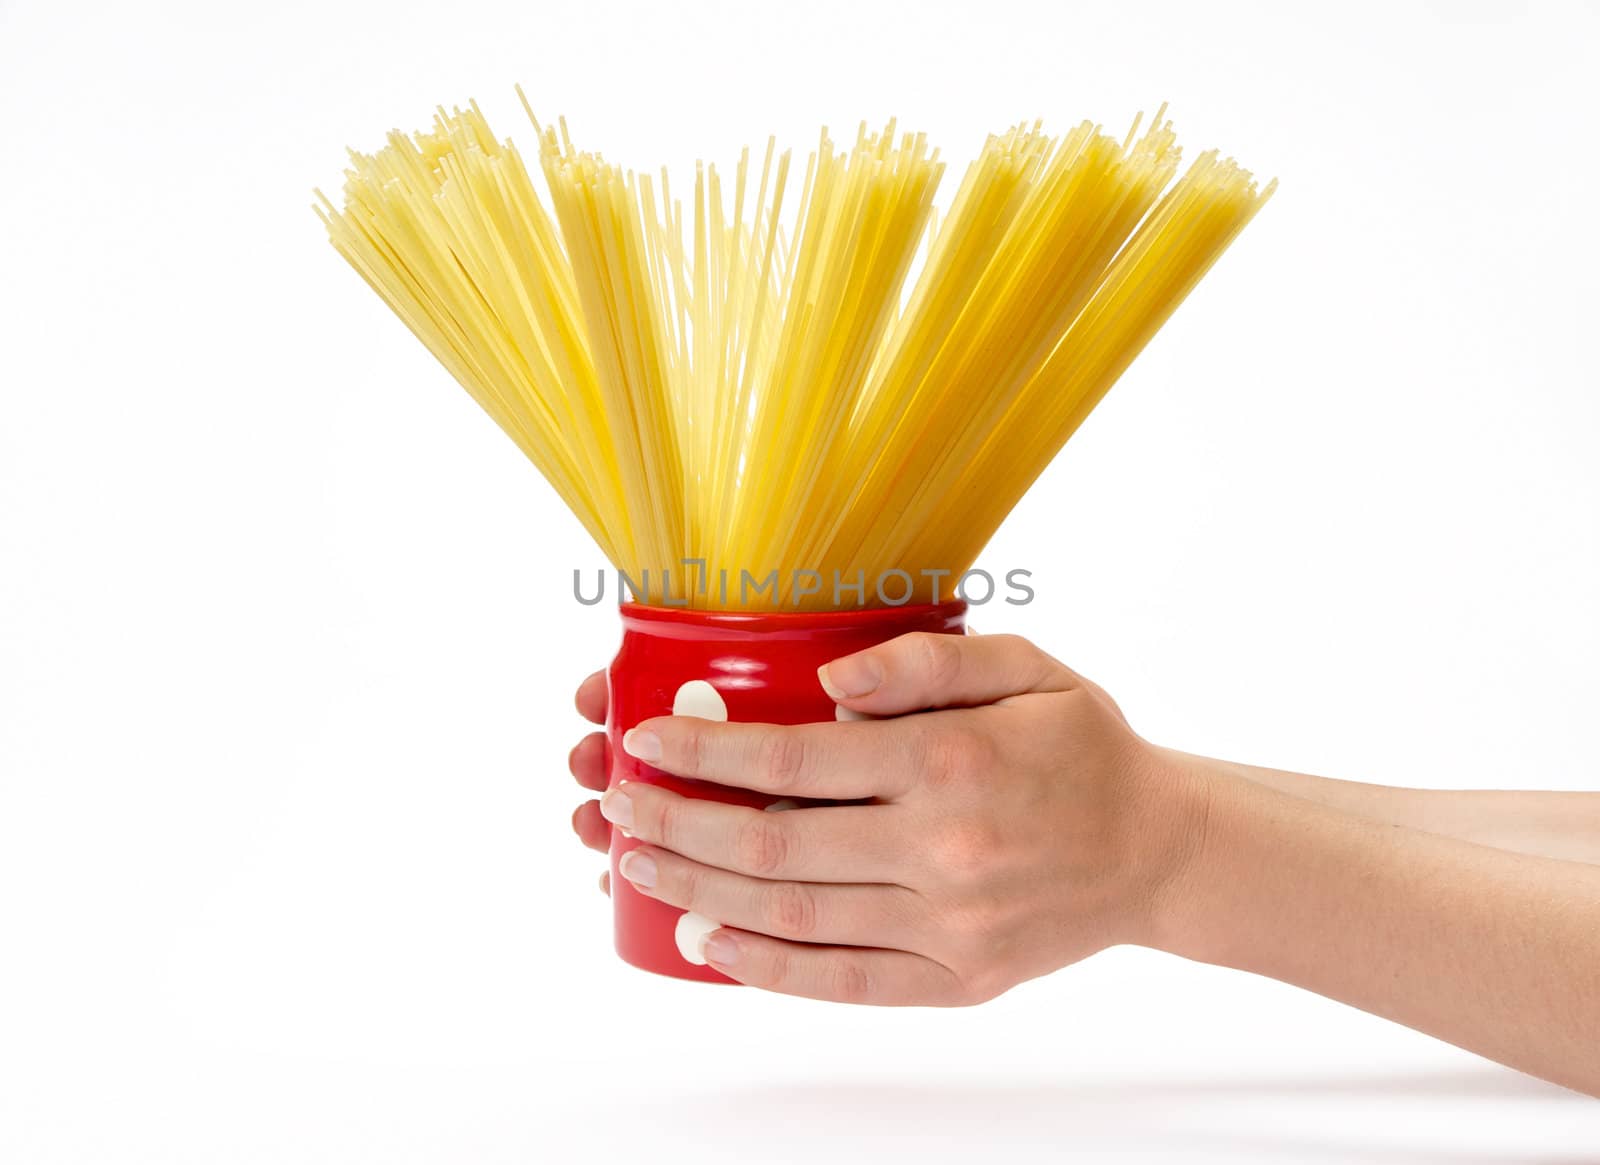 Woman's hands holding red jar full of spaghetti inside.  Isolated on a white background.